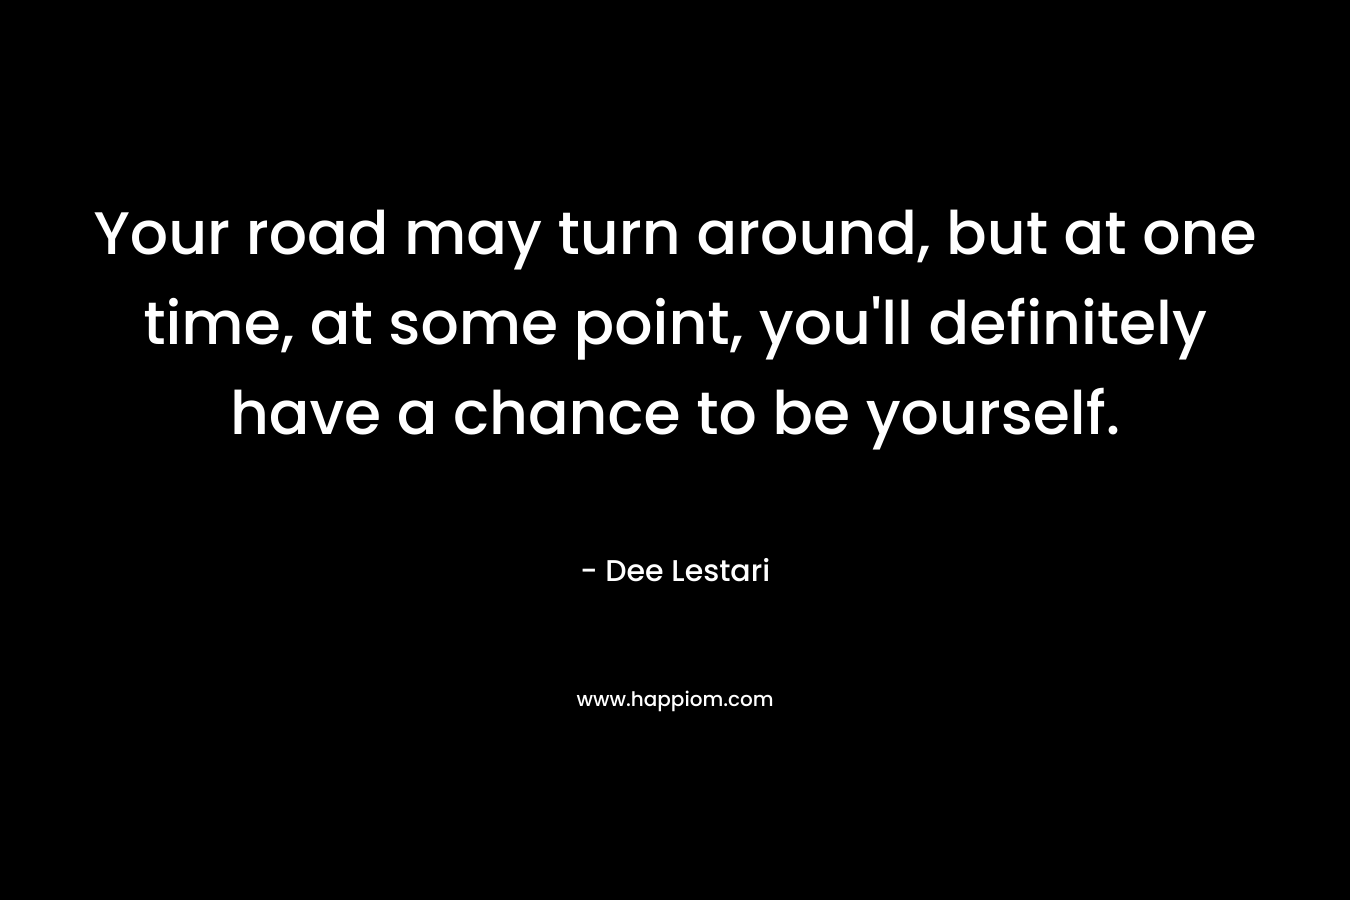 Your road may turn around, but at one time, at some point, you'll definitely have a chance to be yourself.